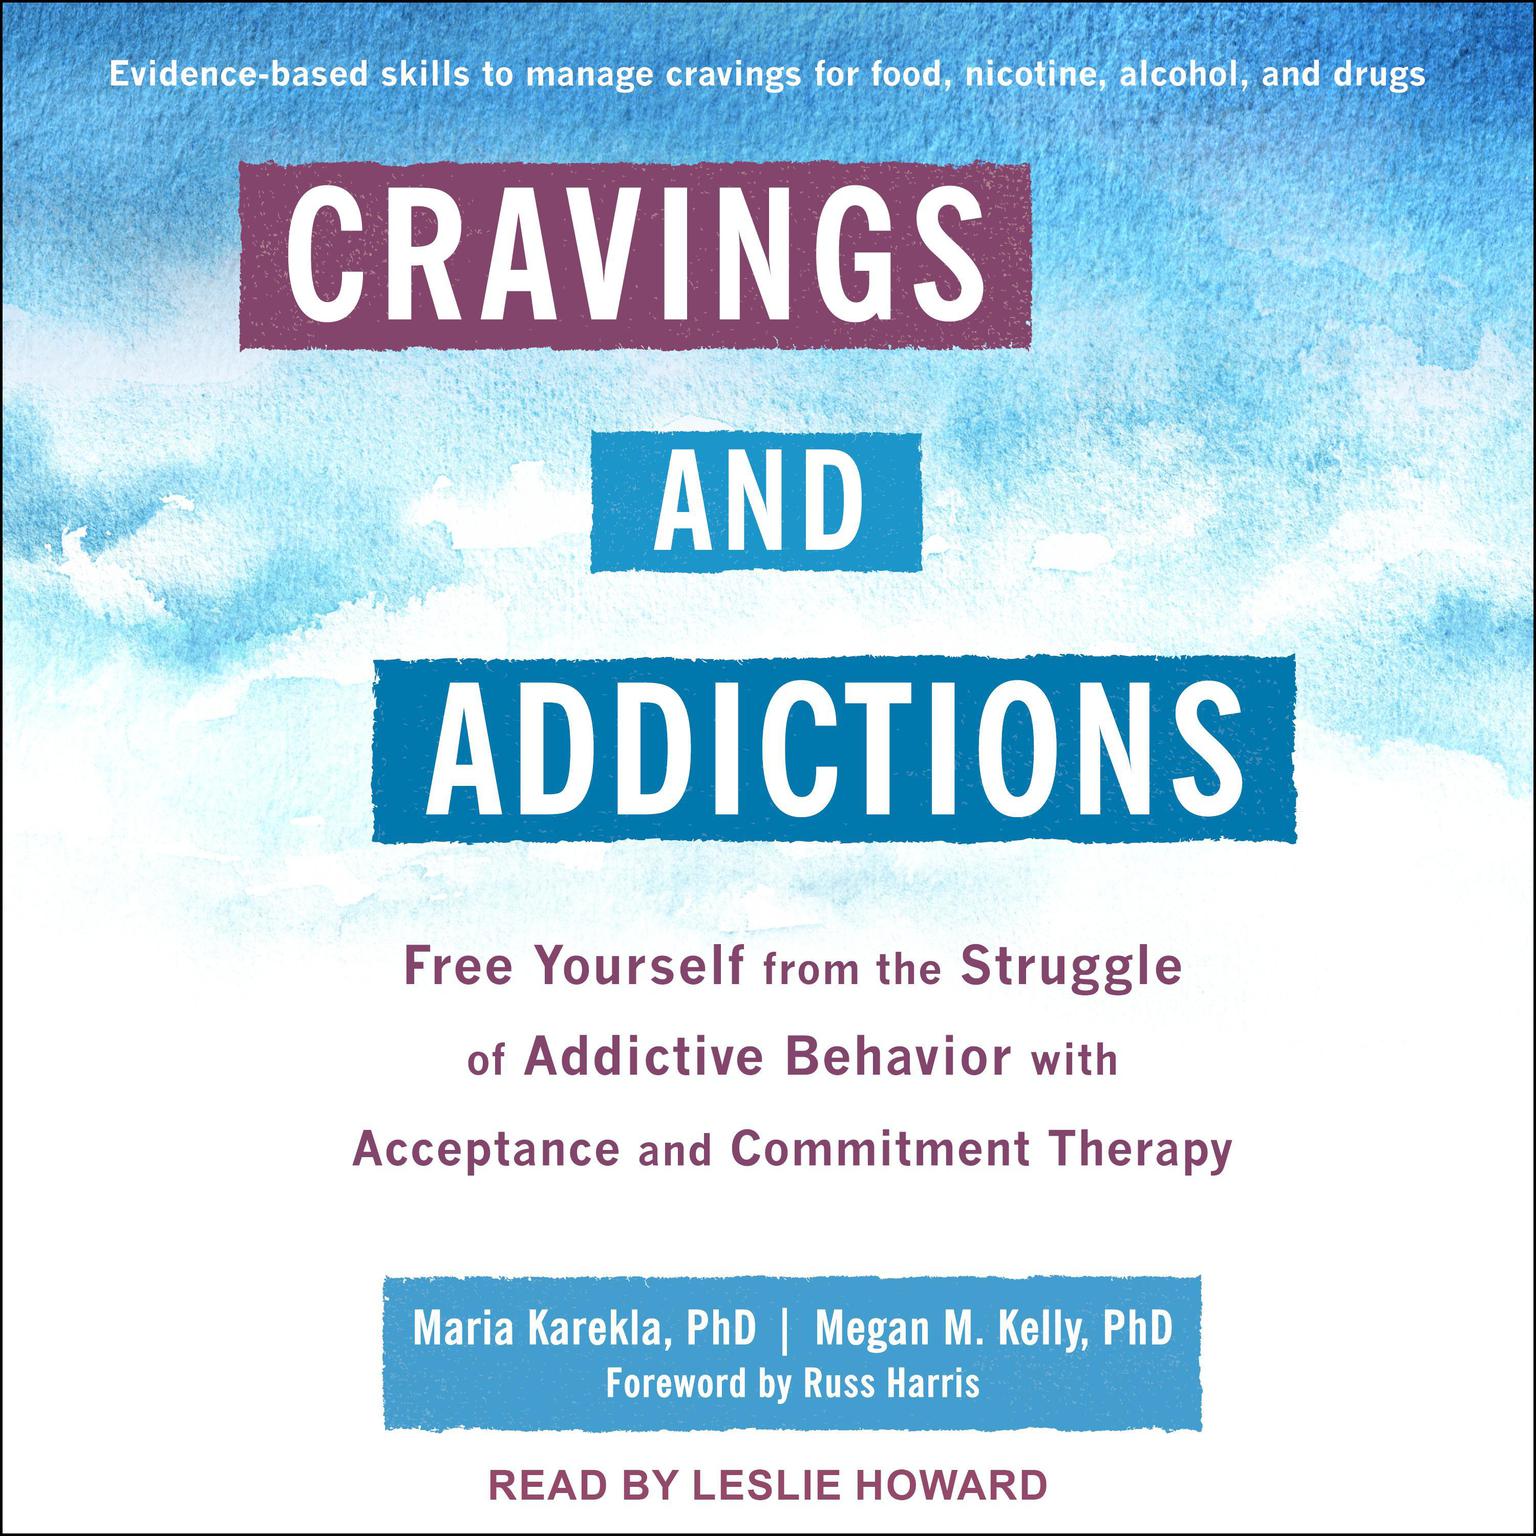 Cravings and Addictions: Free Yourself from the Struggle of Addictive Behavior with Acceptance and Commitment Therapy Audiobook, by Maria Karekla